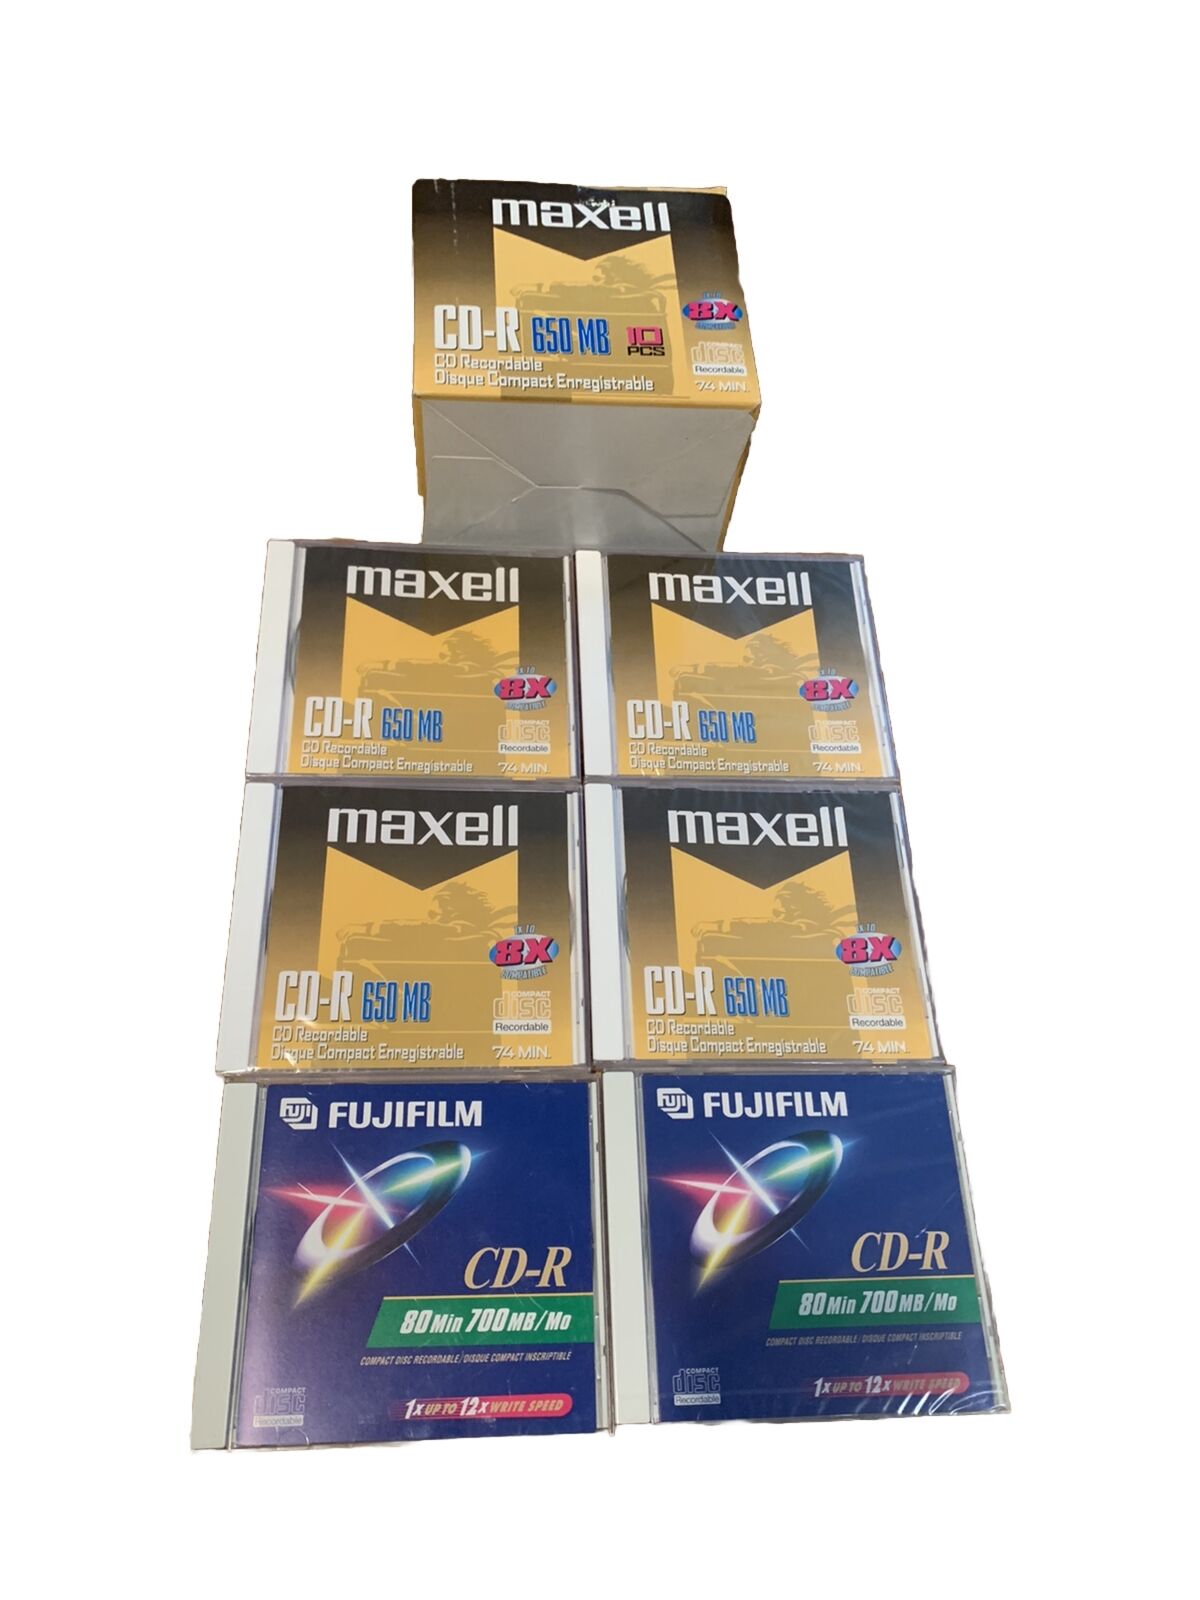 Maxell CD-R 74 650 MB 74 Minute Premium Grade Compact Discs 1 Pack 10 + 6 Indv